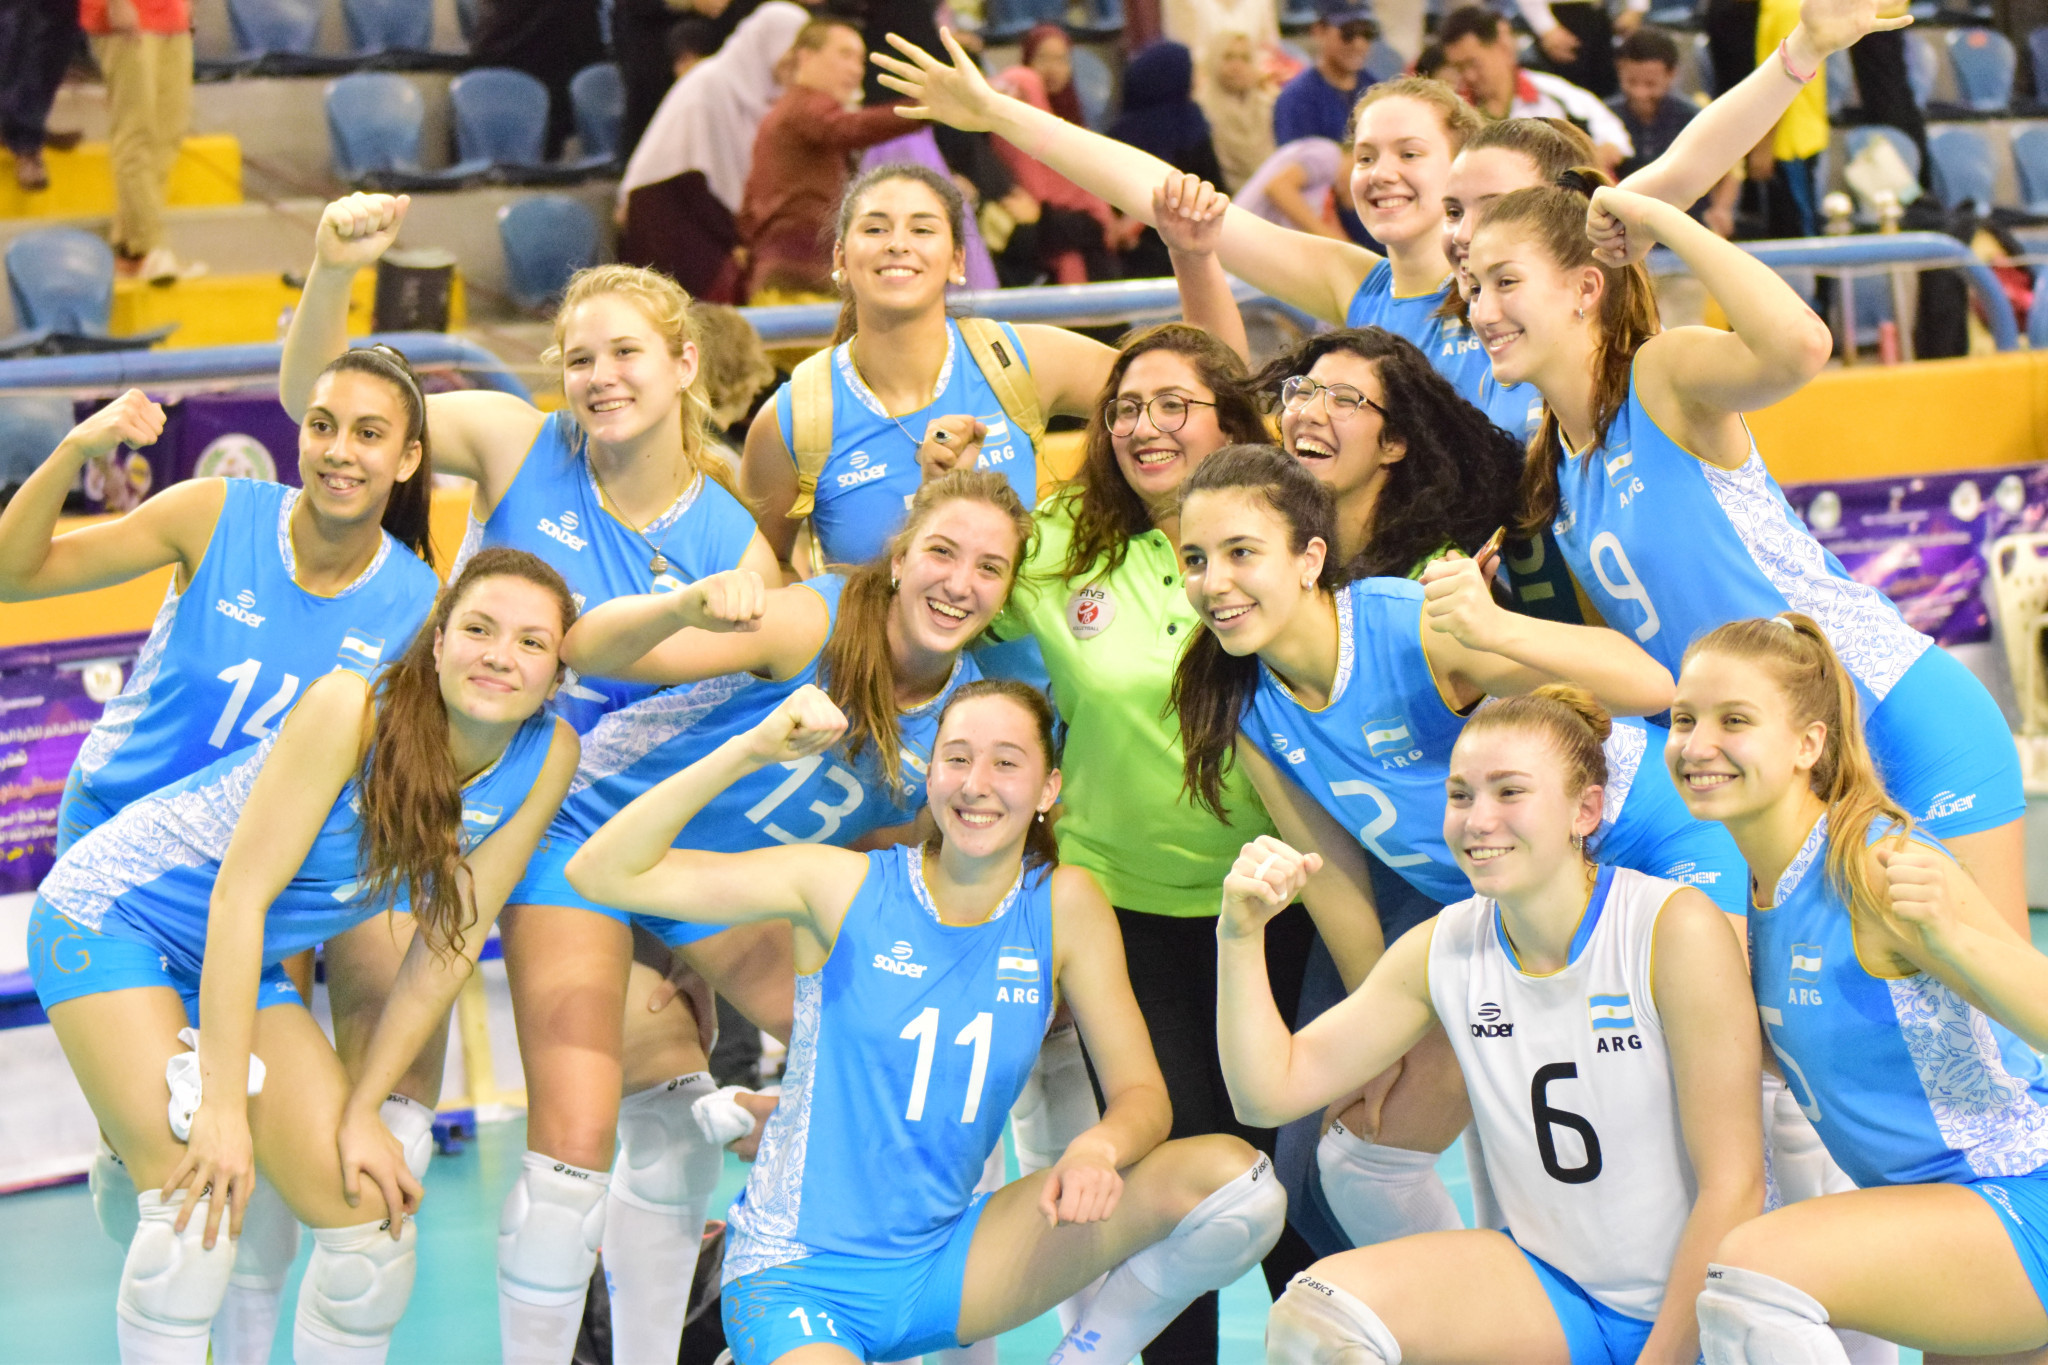 Argentina secure crucial victory to reach knockout phase at FIVB Girls' Under-18 World Championships